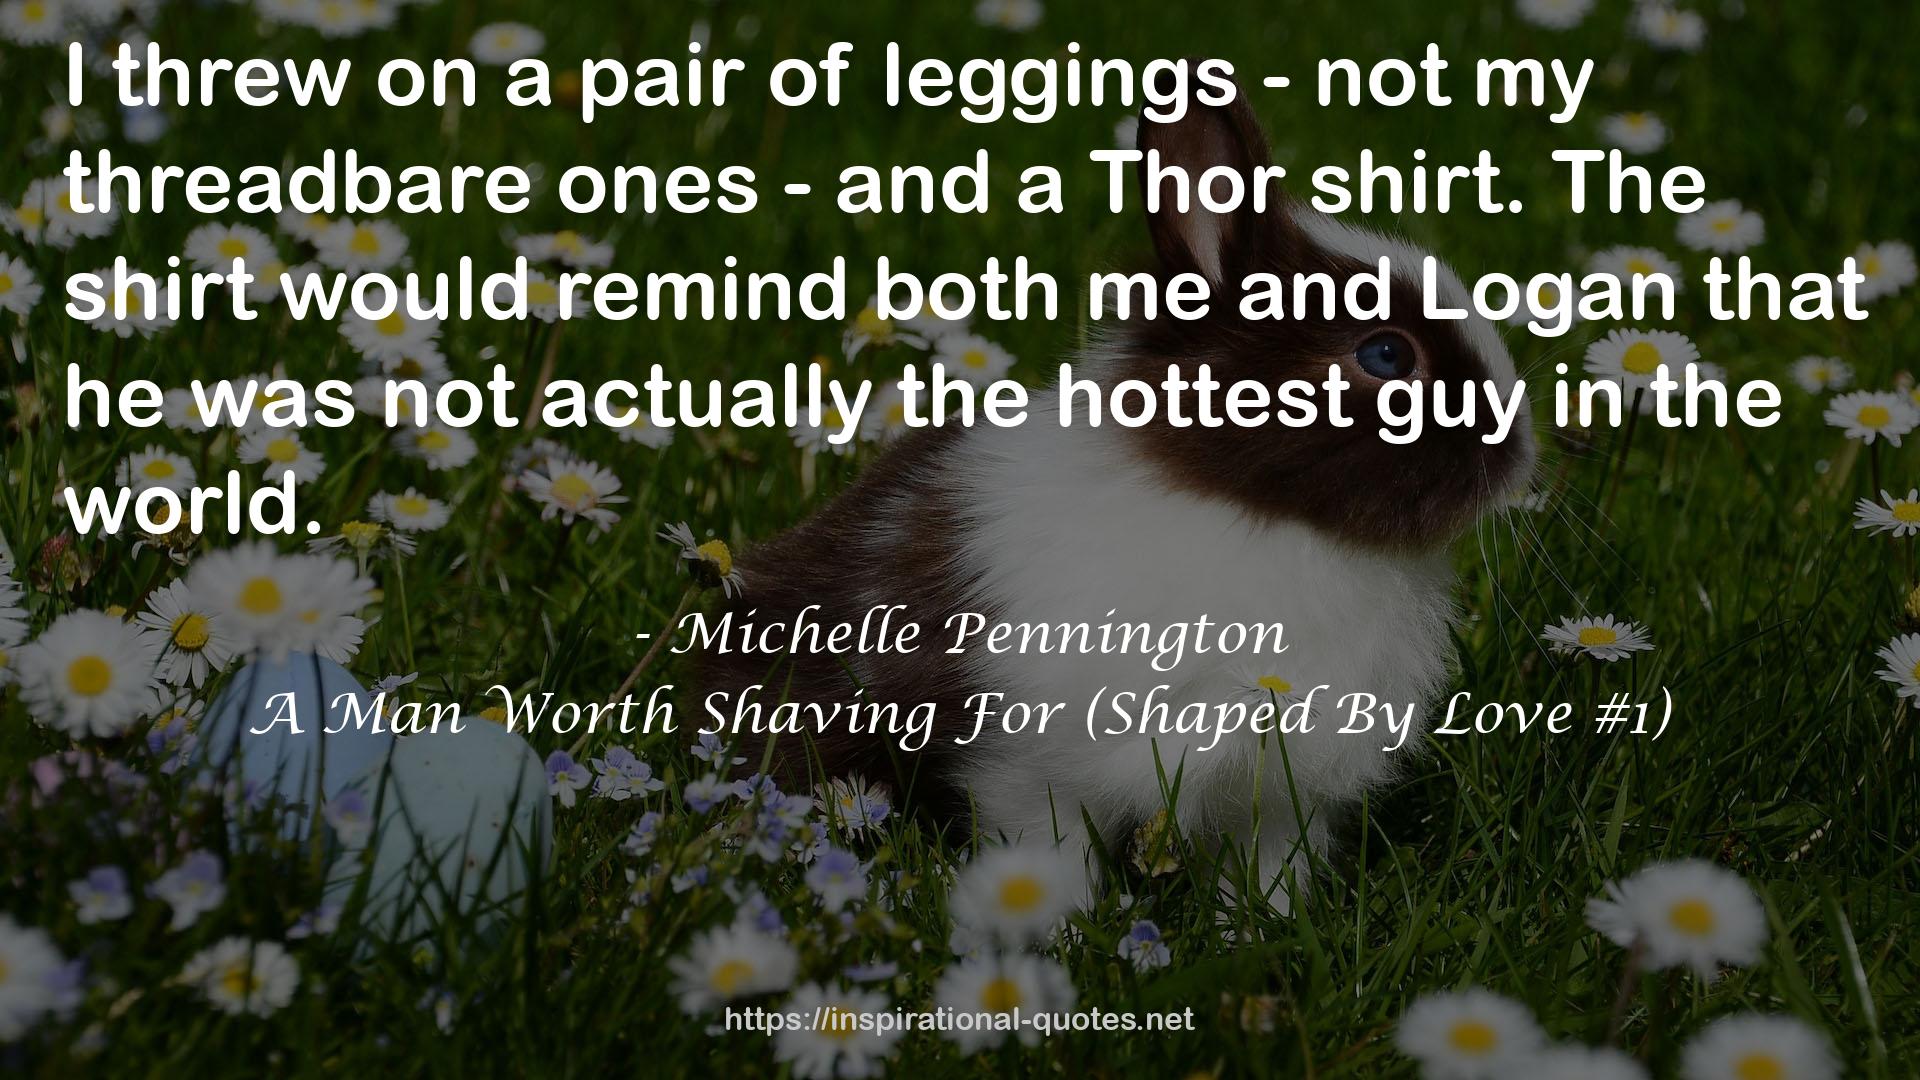 A Man Worth Shaving For (Shaped By Love #1) QUOTES